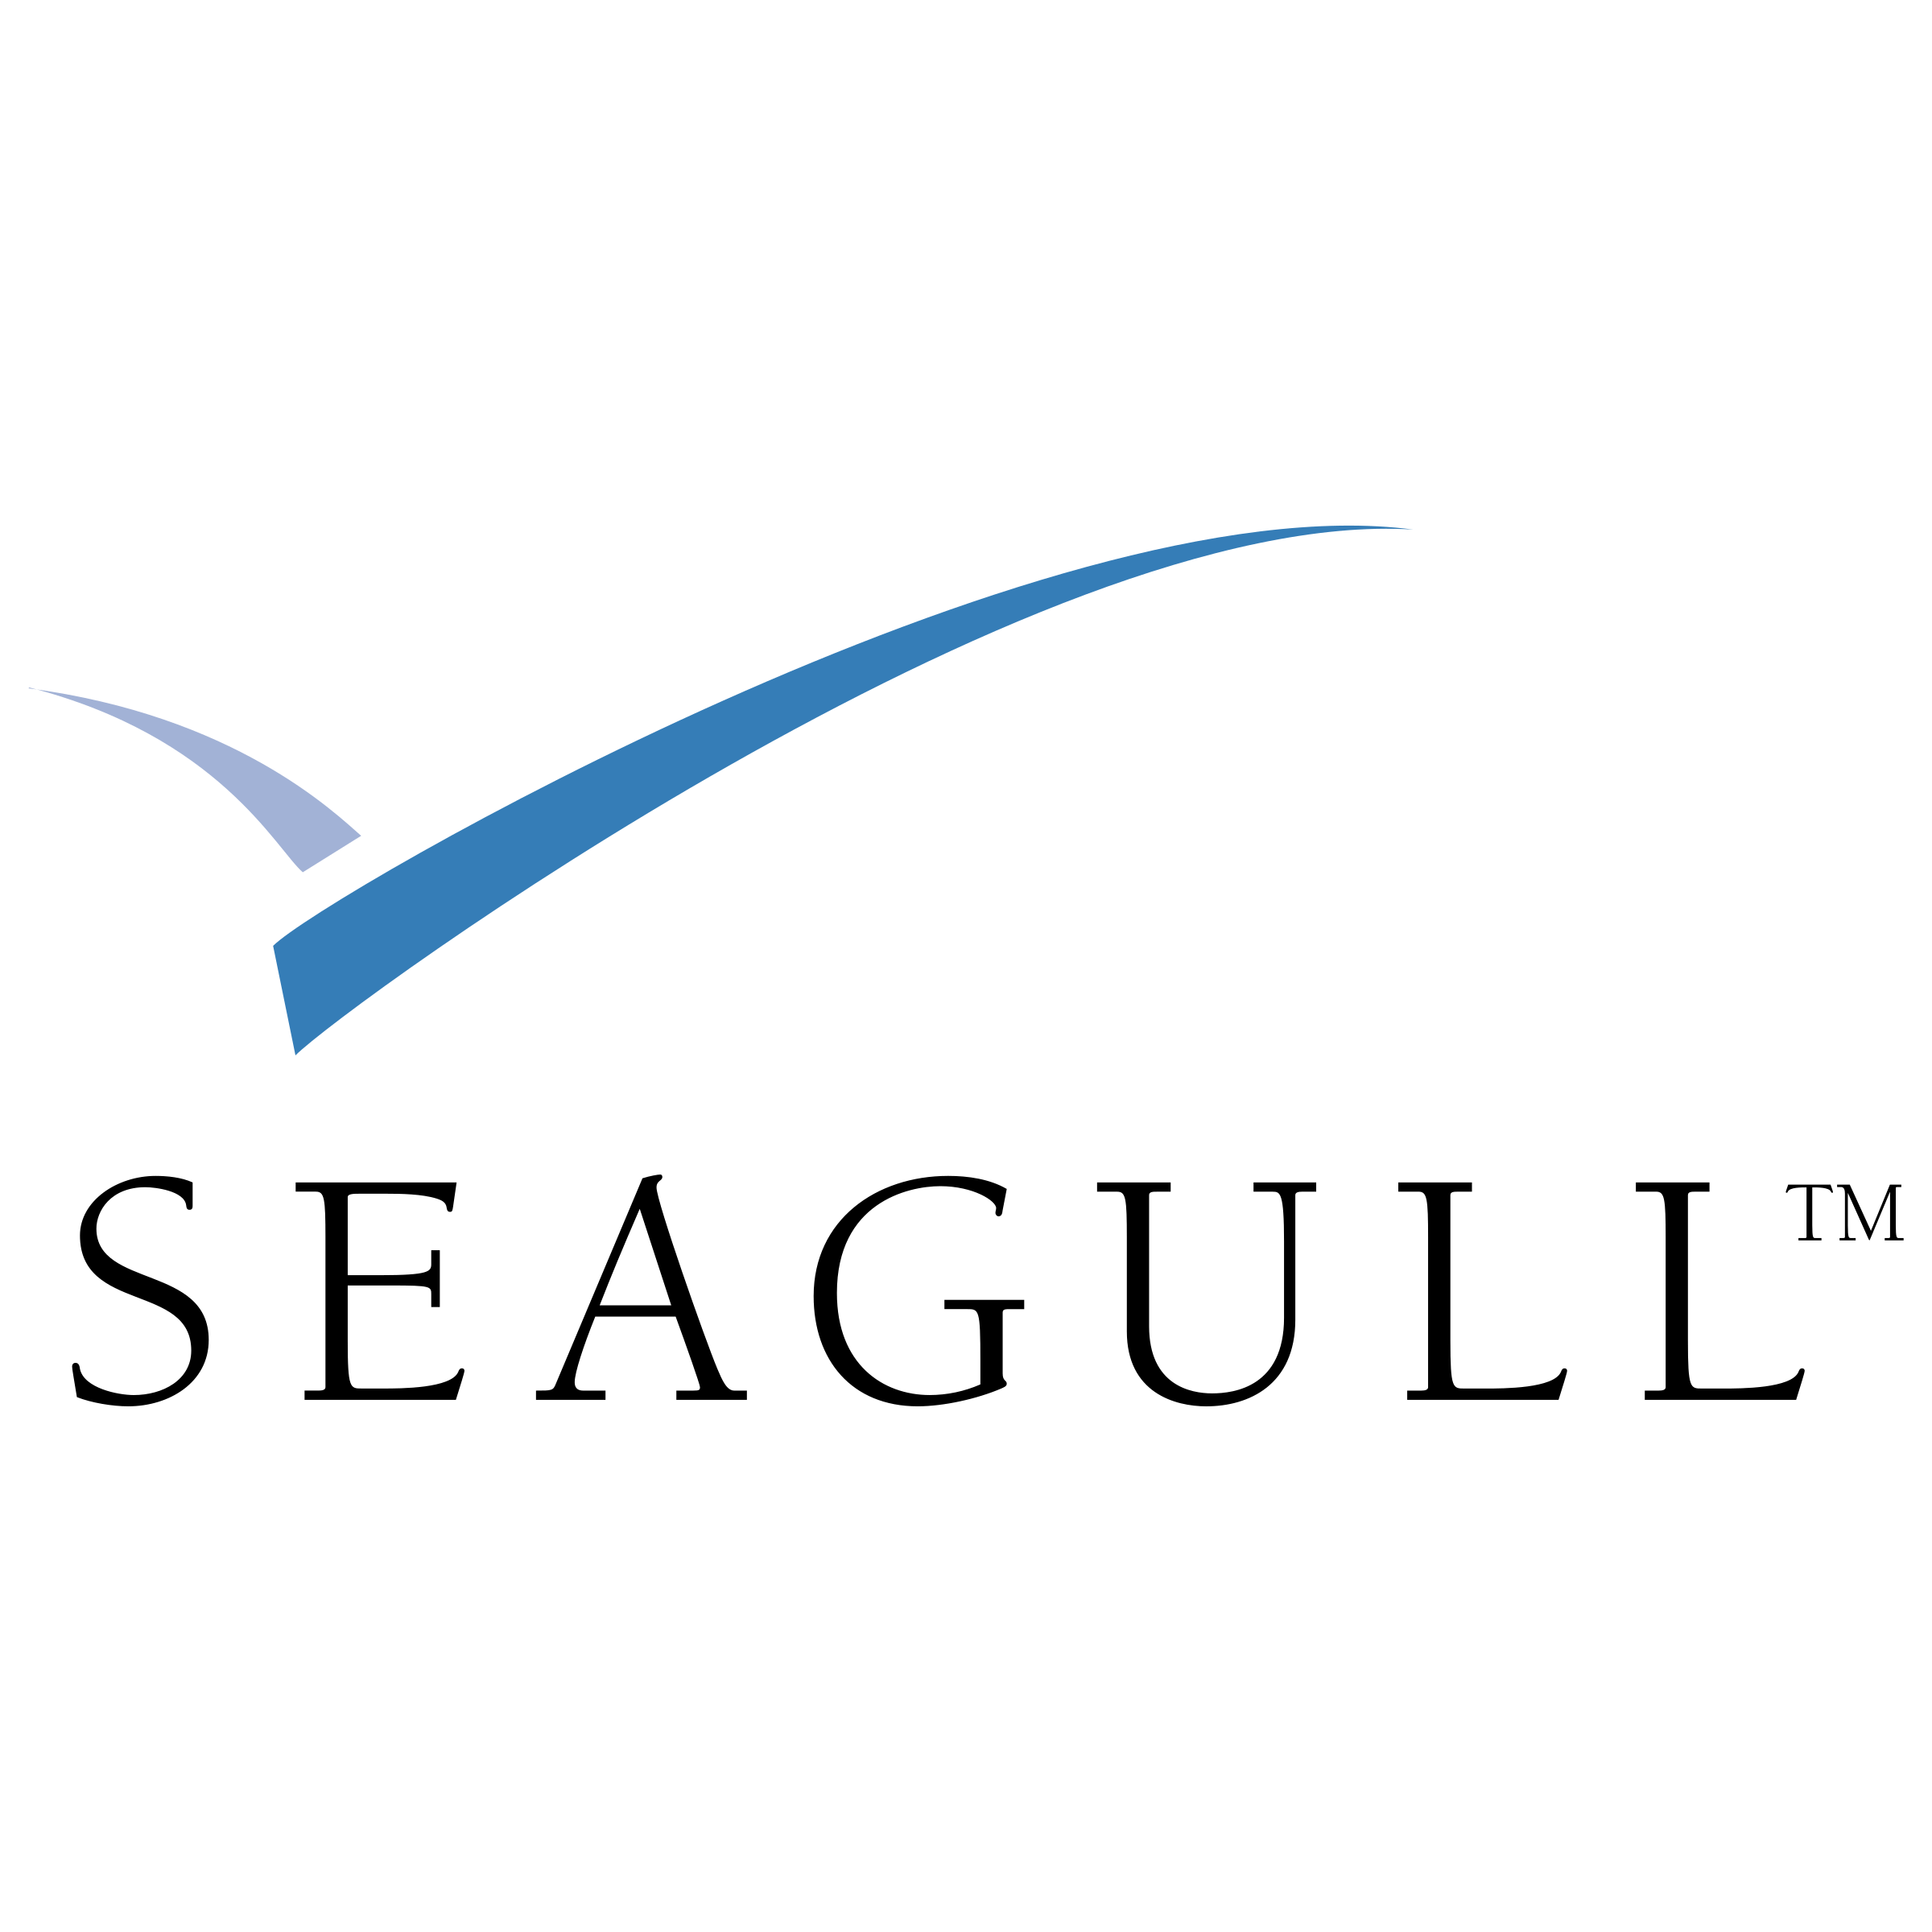 Seagull Logo - Seagull Logo PNG Transparent & SVG Vector - Freebie Supply